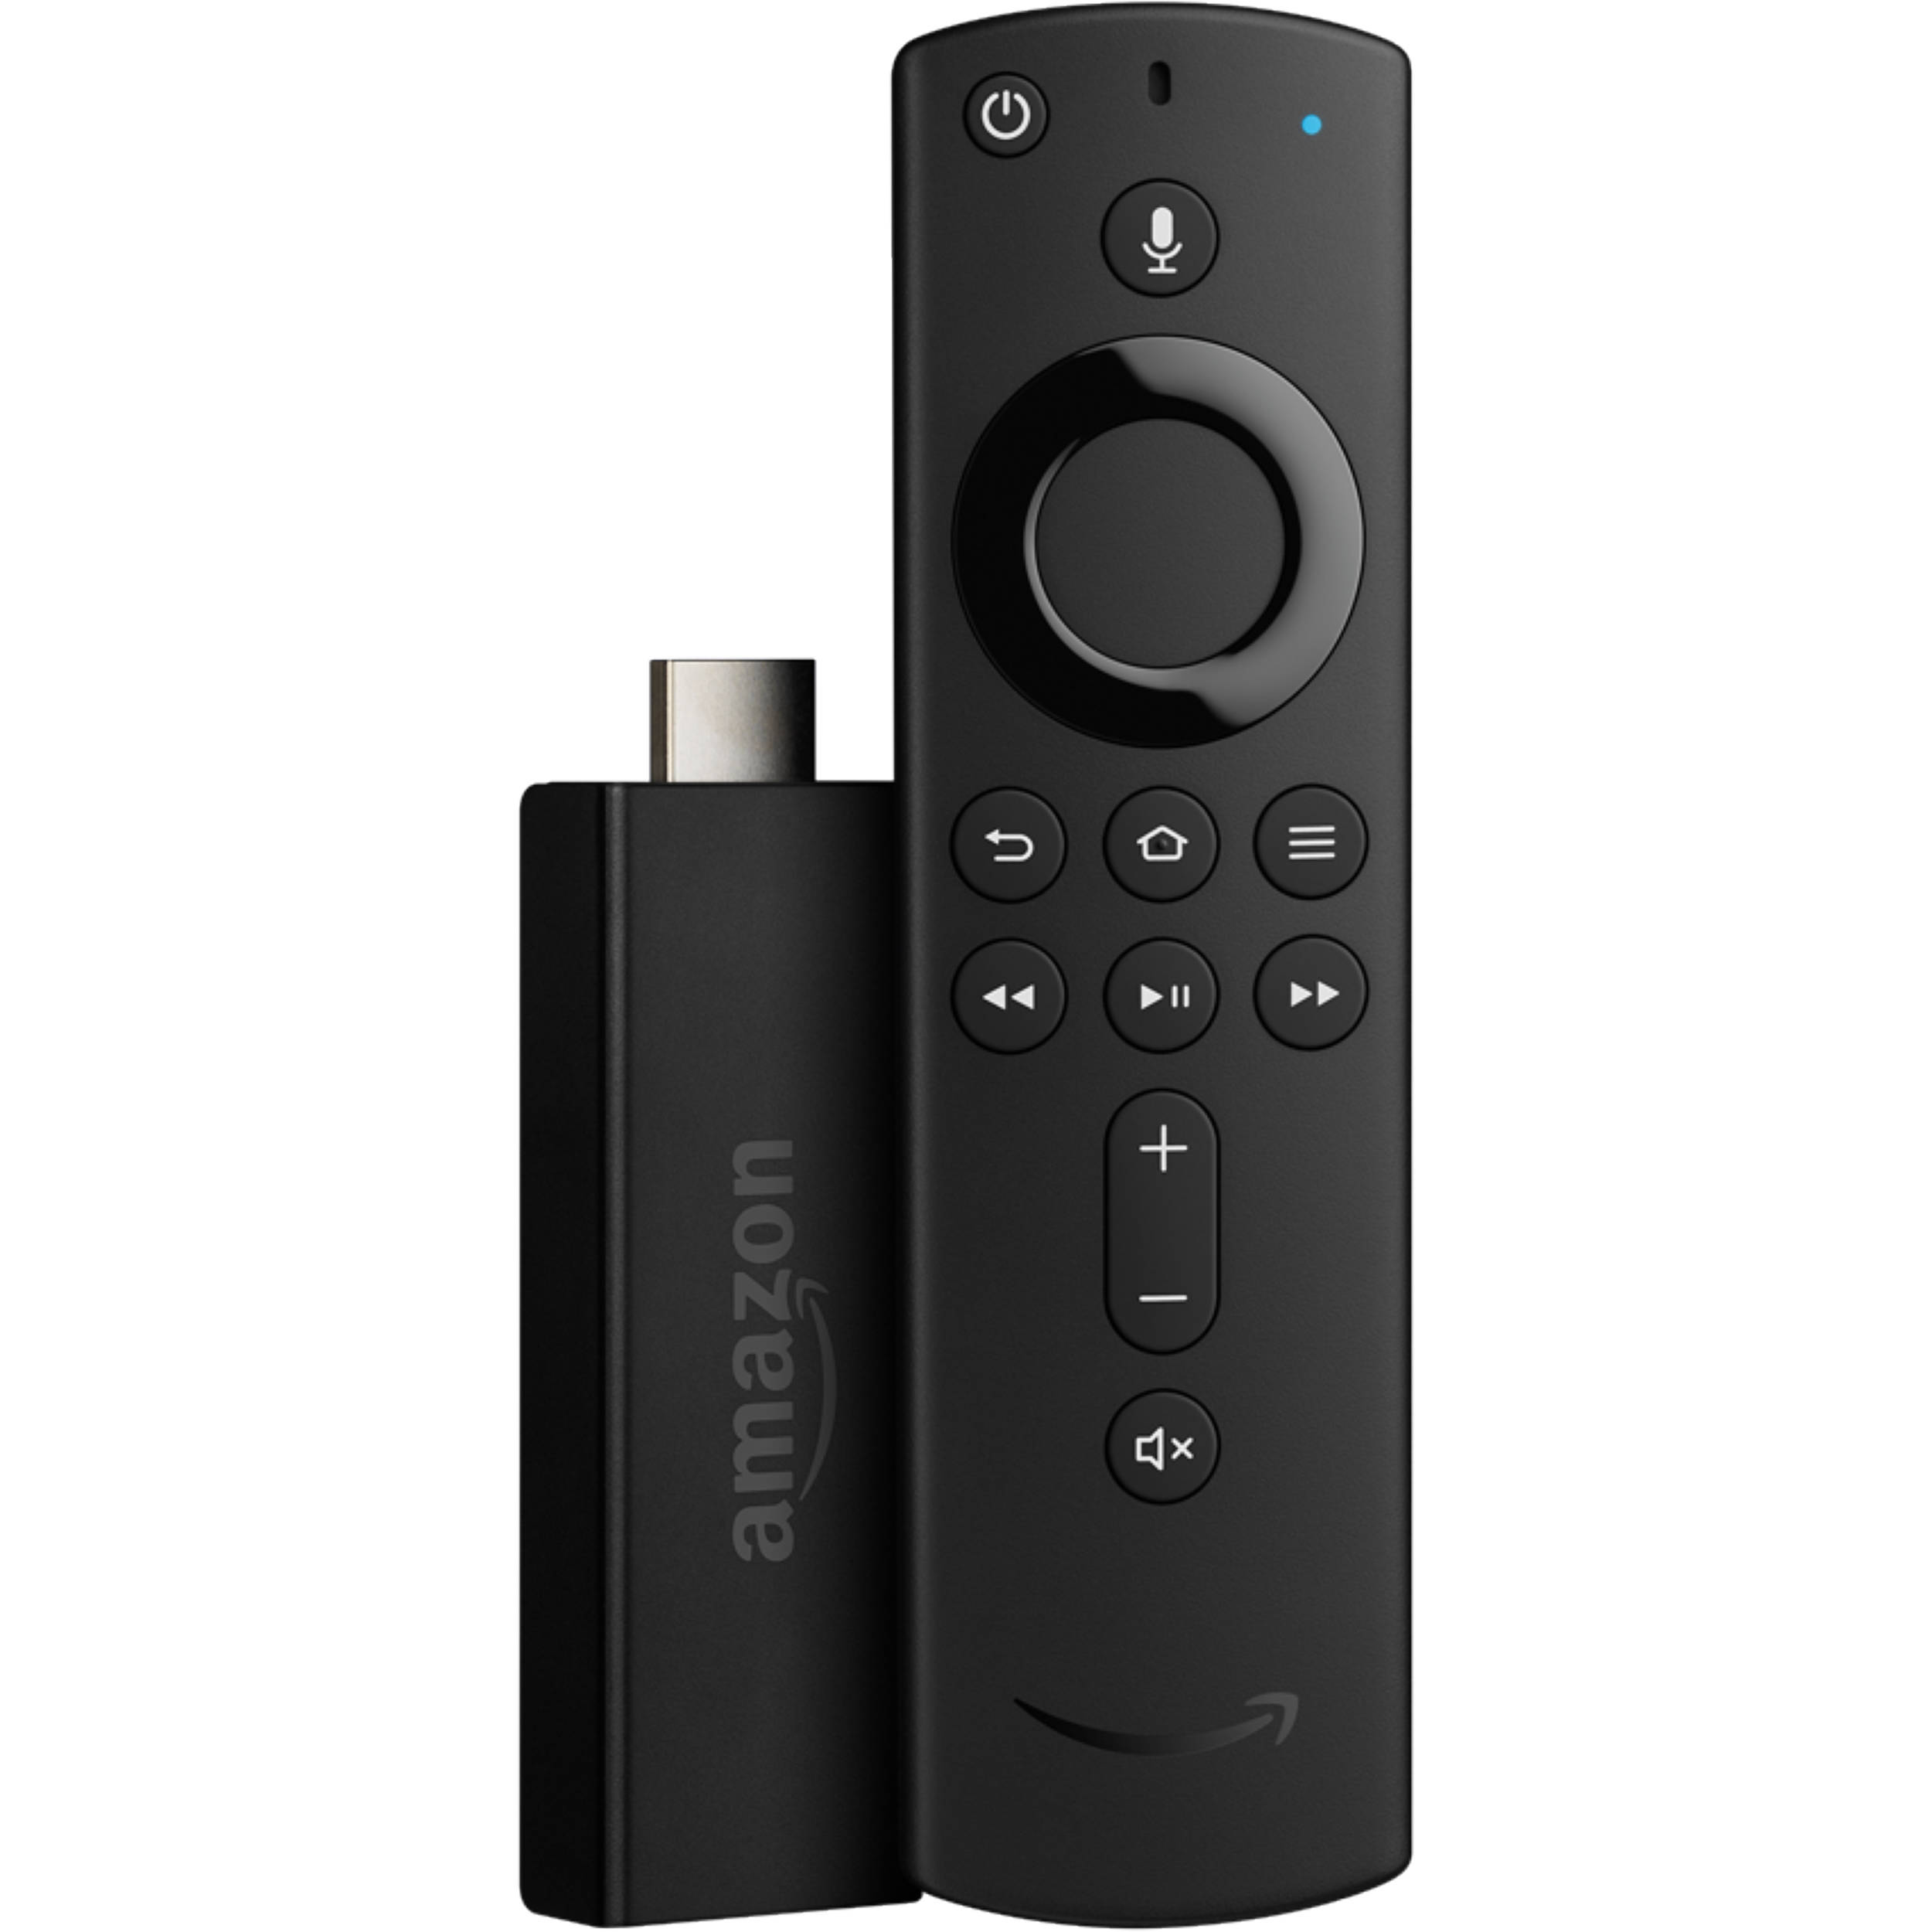 what's included in amazon fire stick